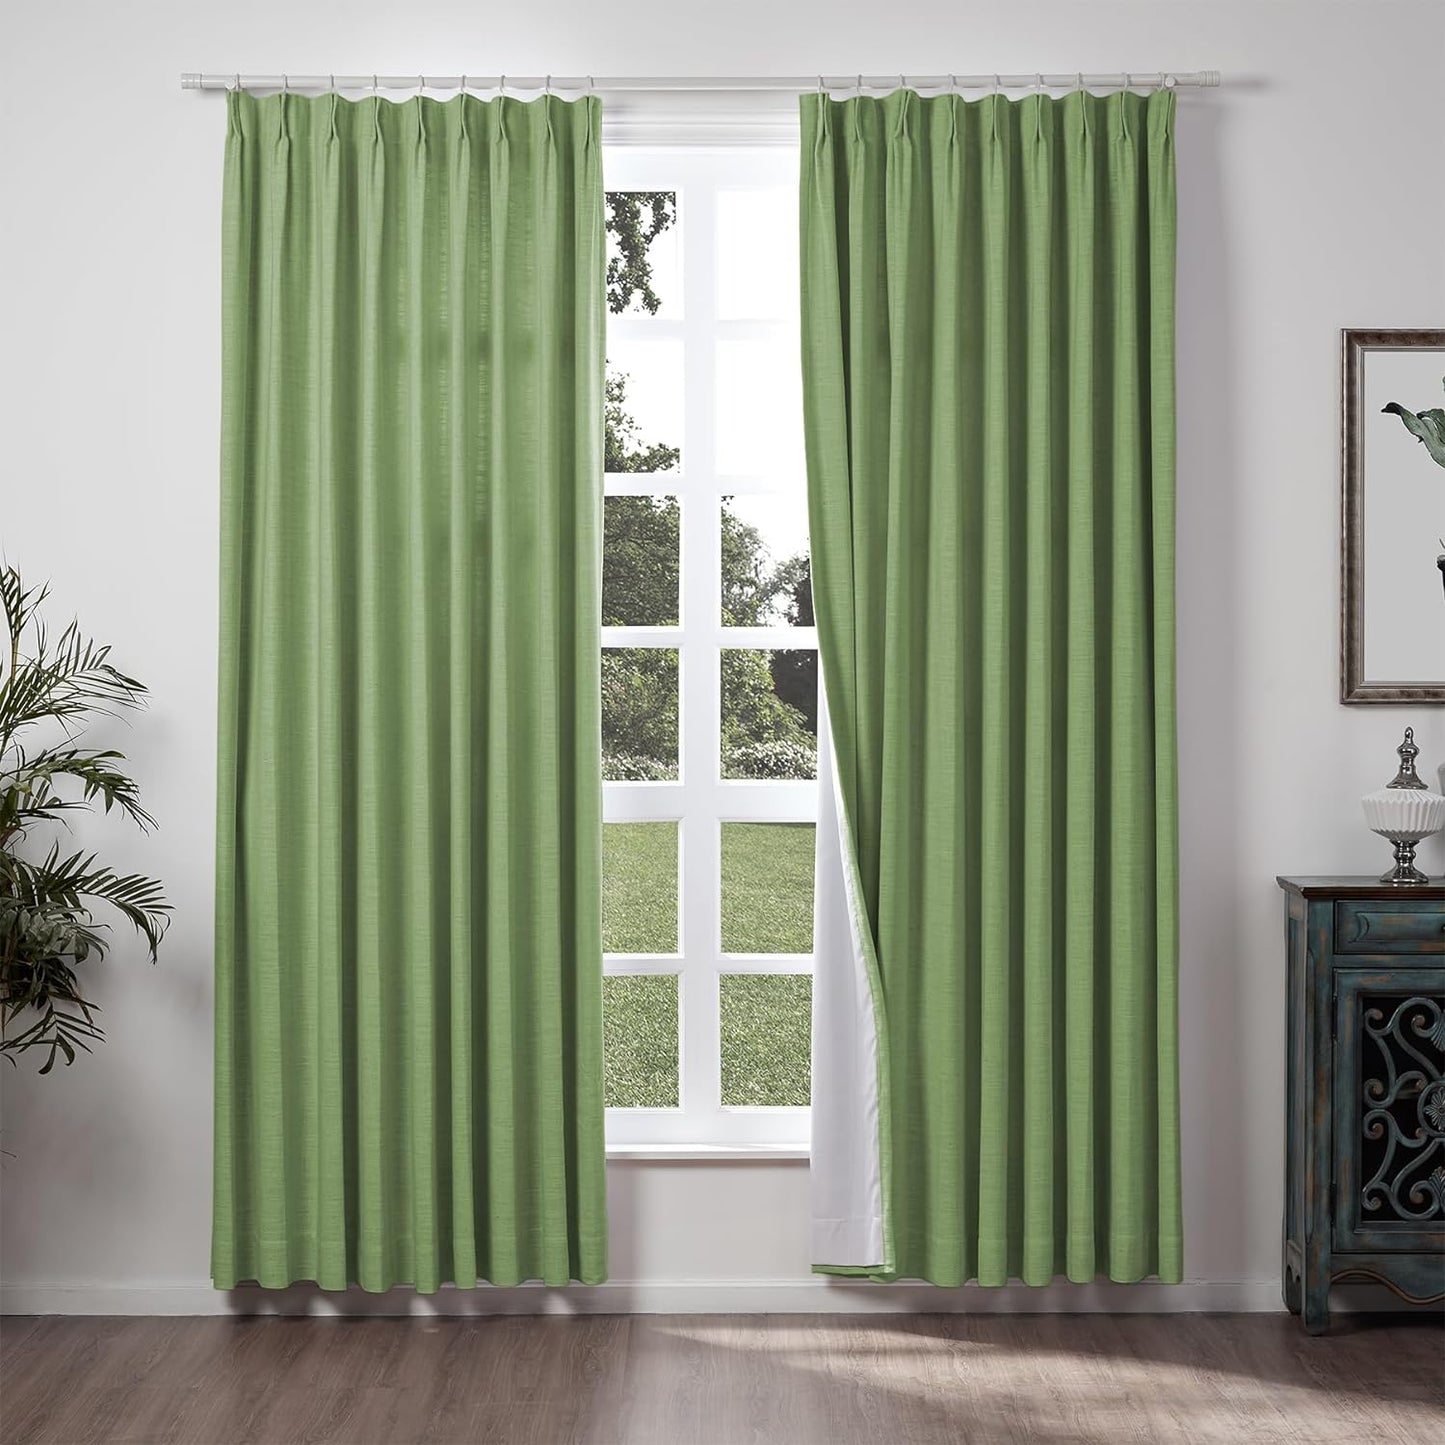 Chadmade 50" W X 84" L Polyester Linen Drape with Blackout Lining Pinch Pleat Curtain for Sliding Door Patio Door Living Room Bedroom, (1 Panel) Beige White Liz Collection  ChadMade Green (30) 72Wx96L 